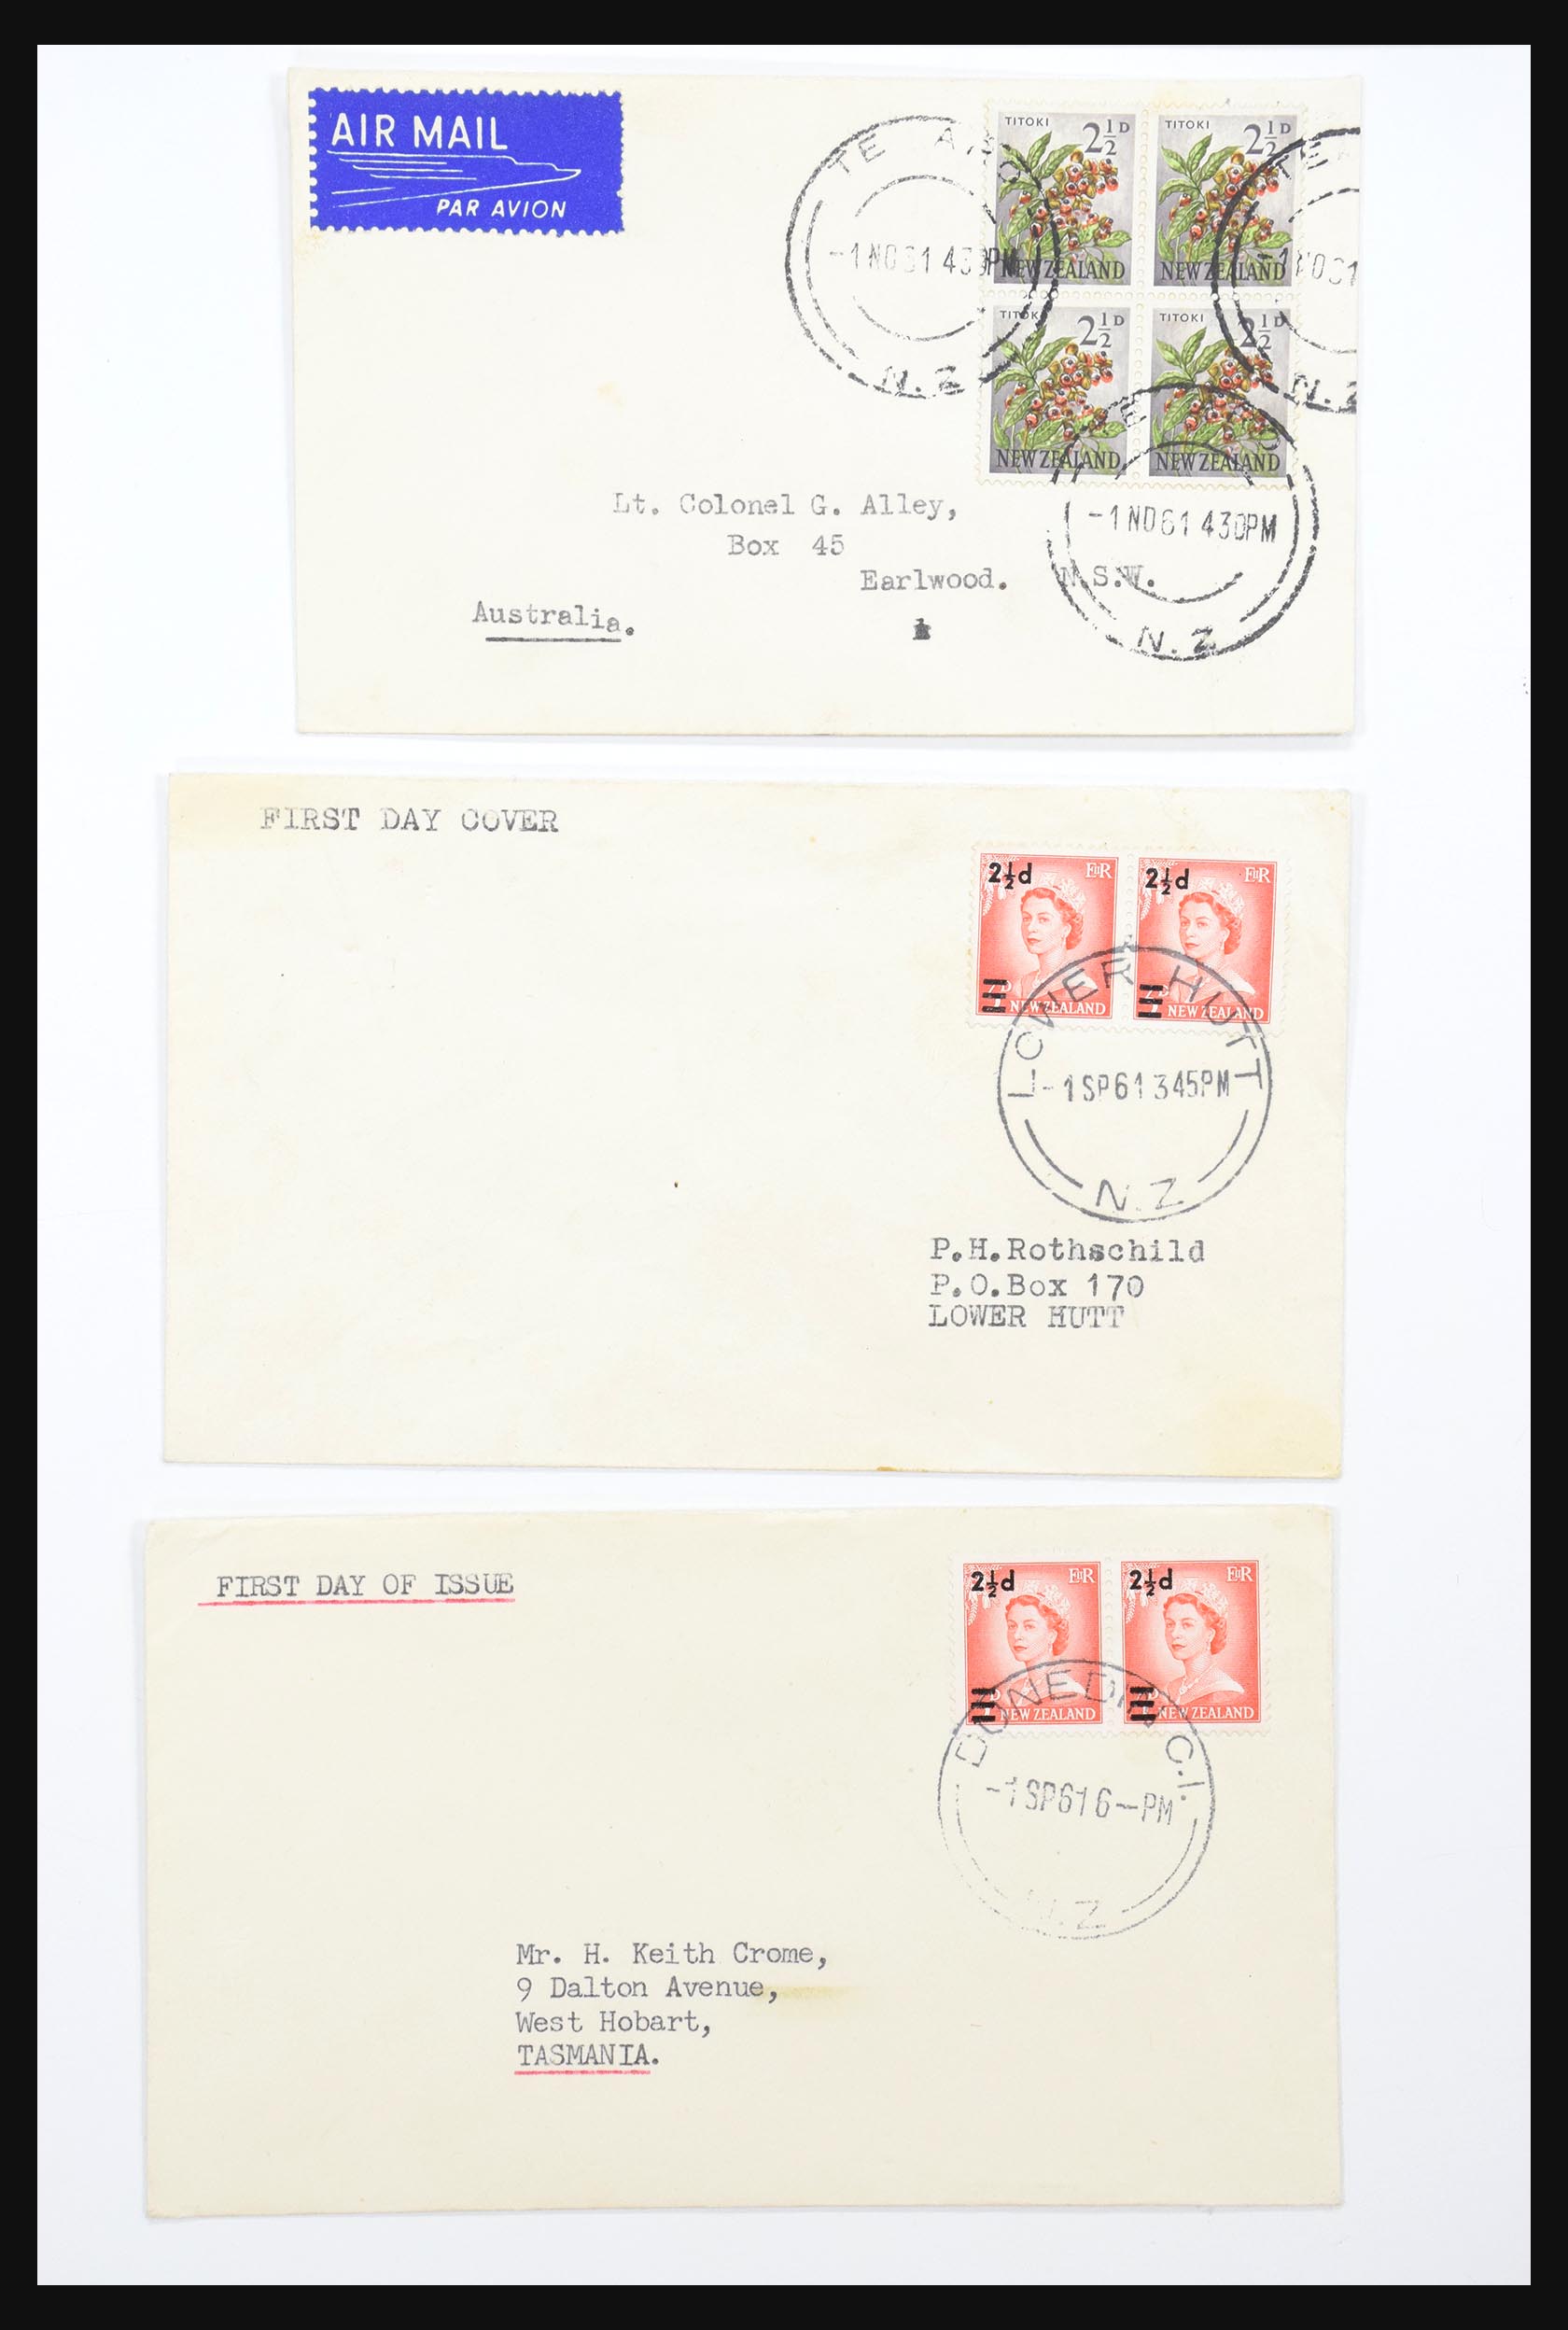 30821 023 - 30821 New Zealand FDC's 1960-1971.